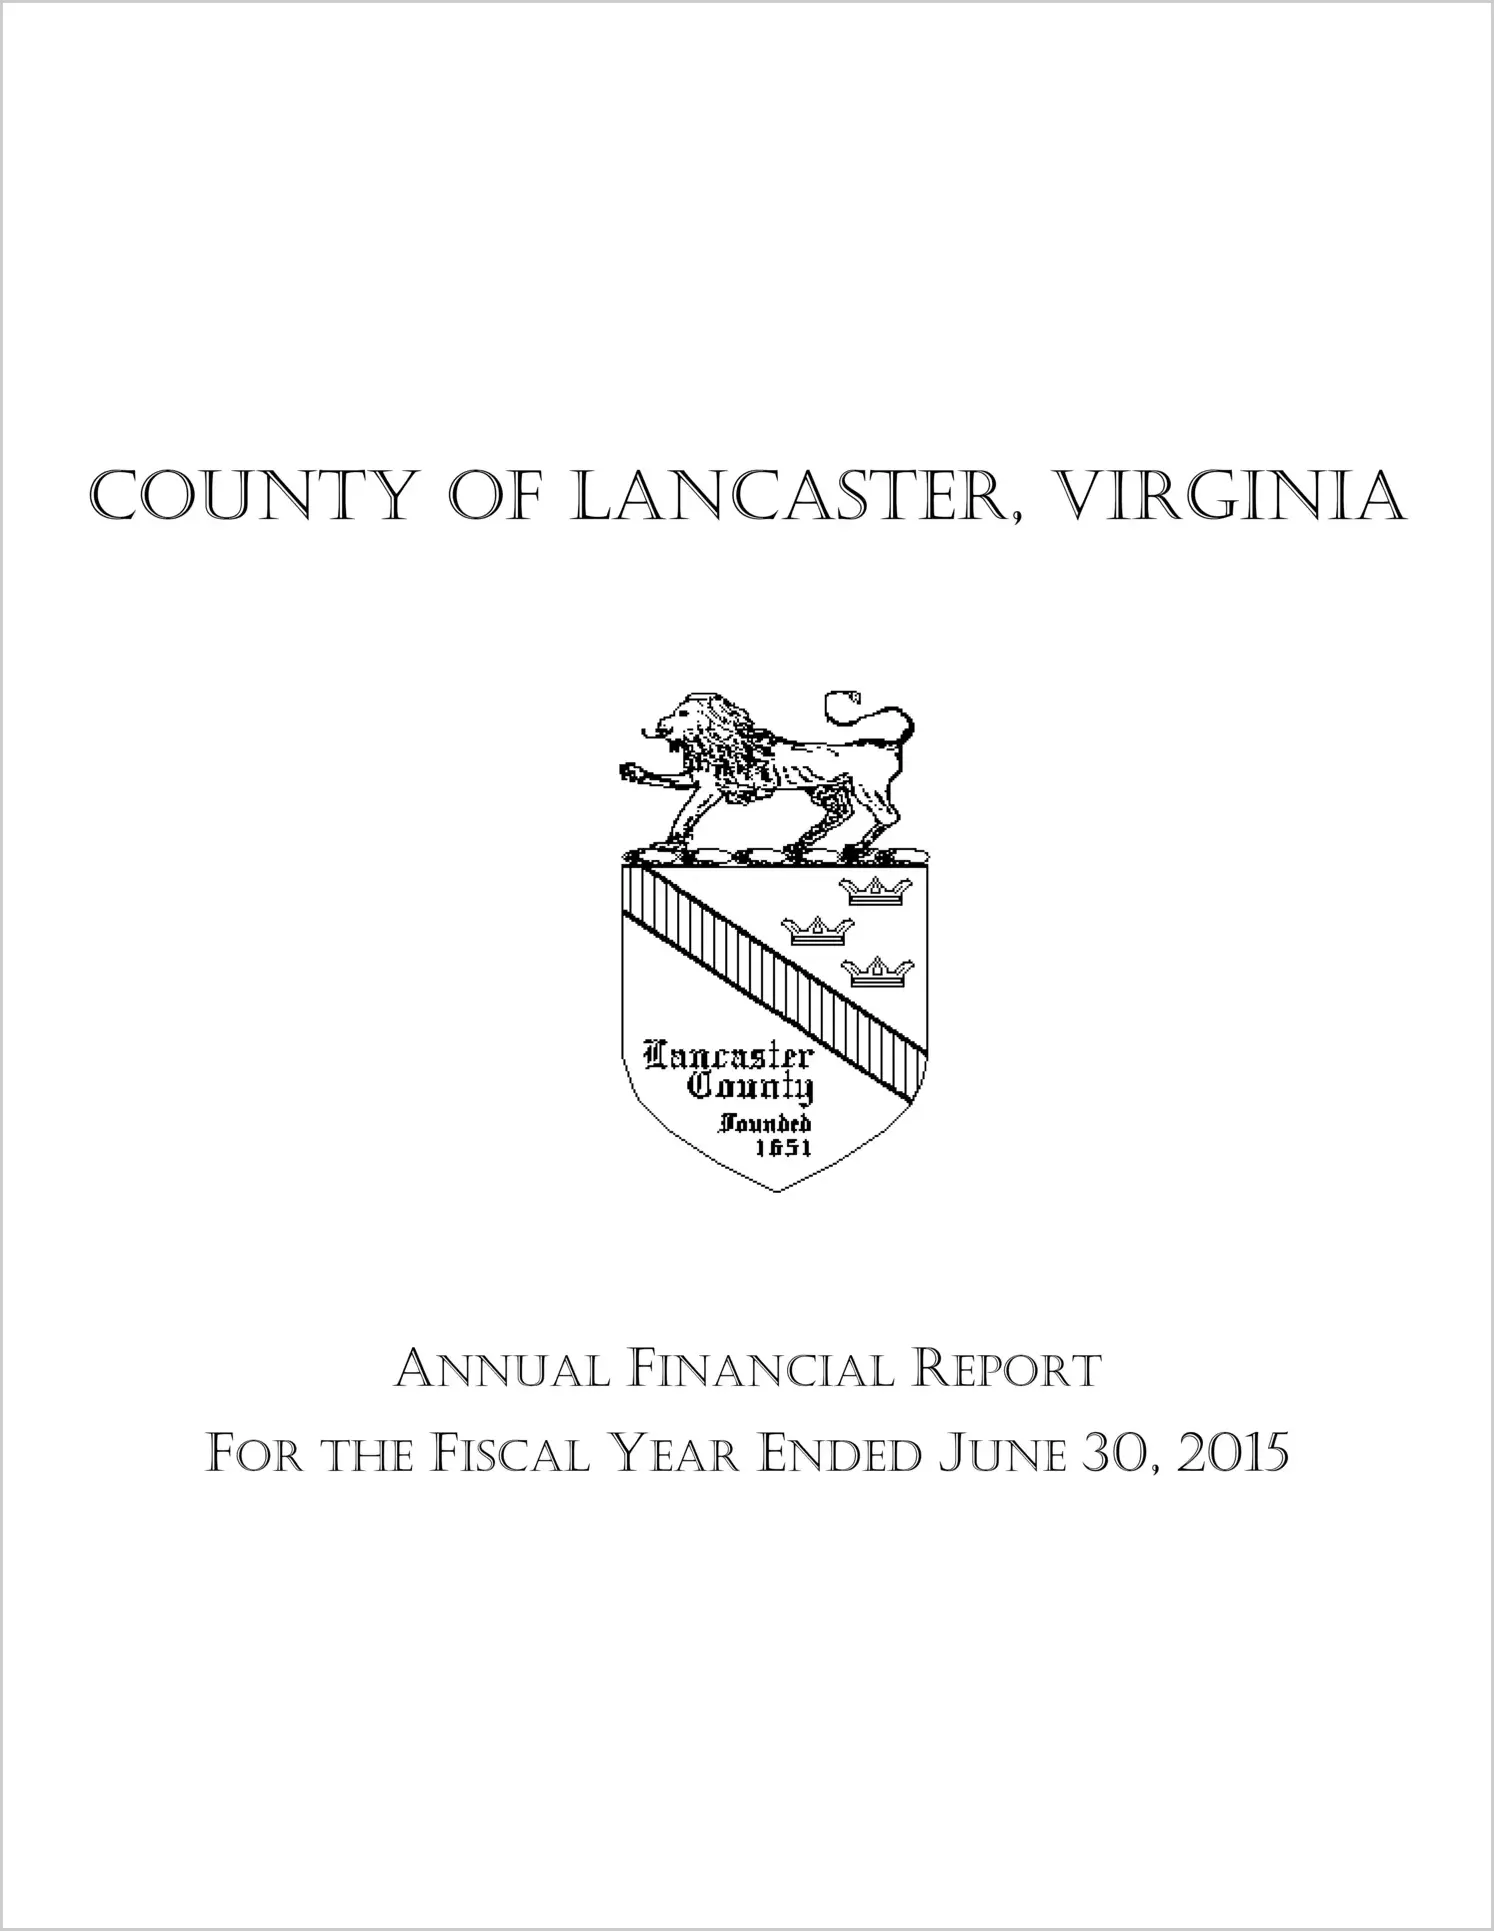 2015 Annual Financial Report for County of Lancaster